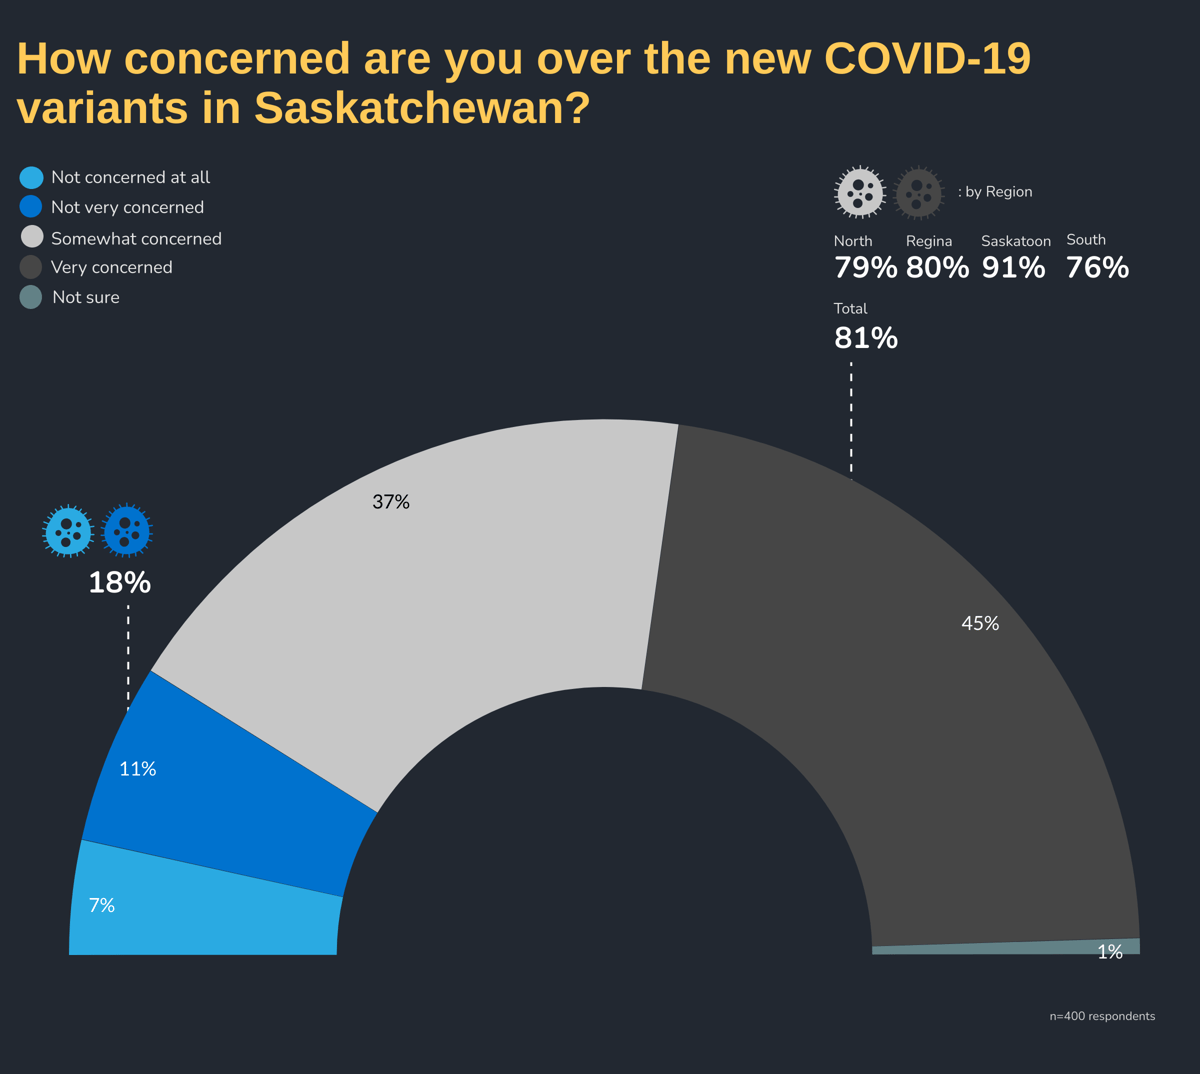 How concerned are you over the new COVID-19 variants in Saskatchewan?  by Region2: Region